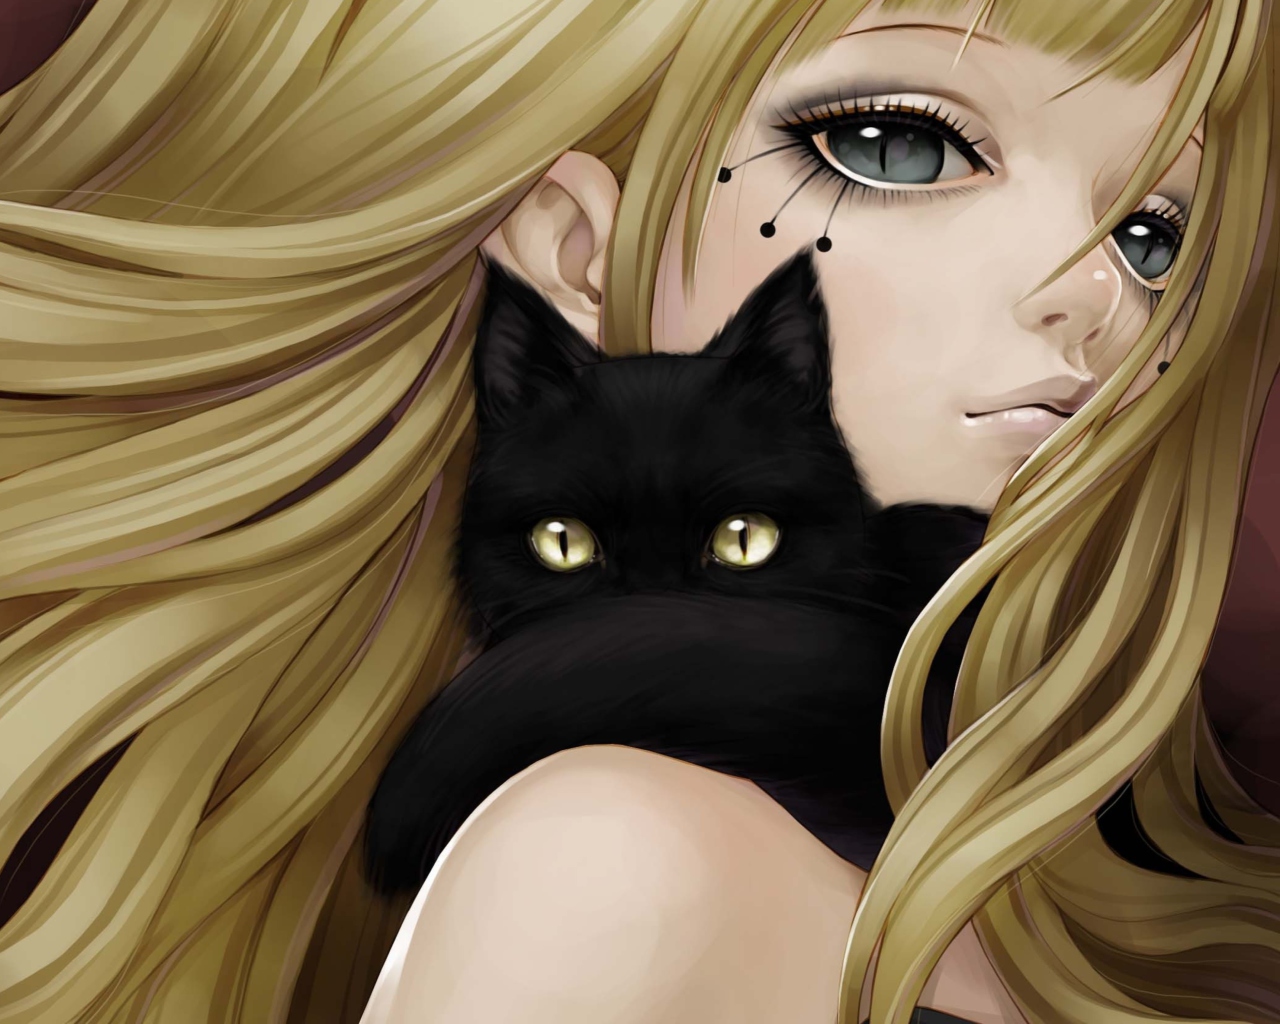 Blonde With Black Cat Drawing wallpaper 1280x1024